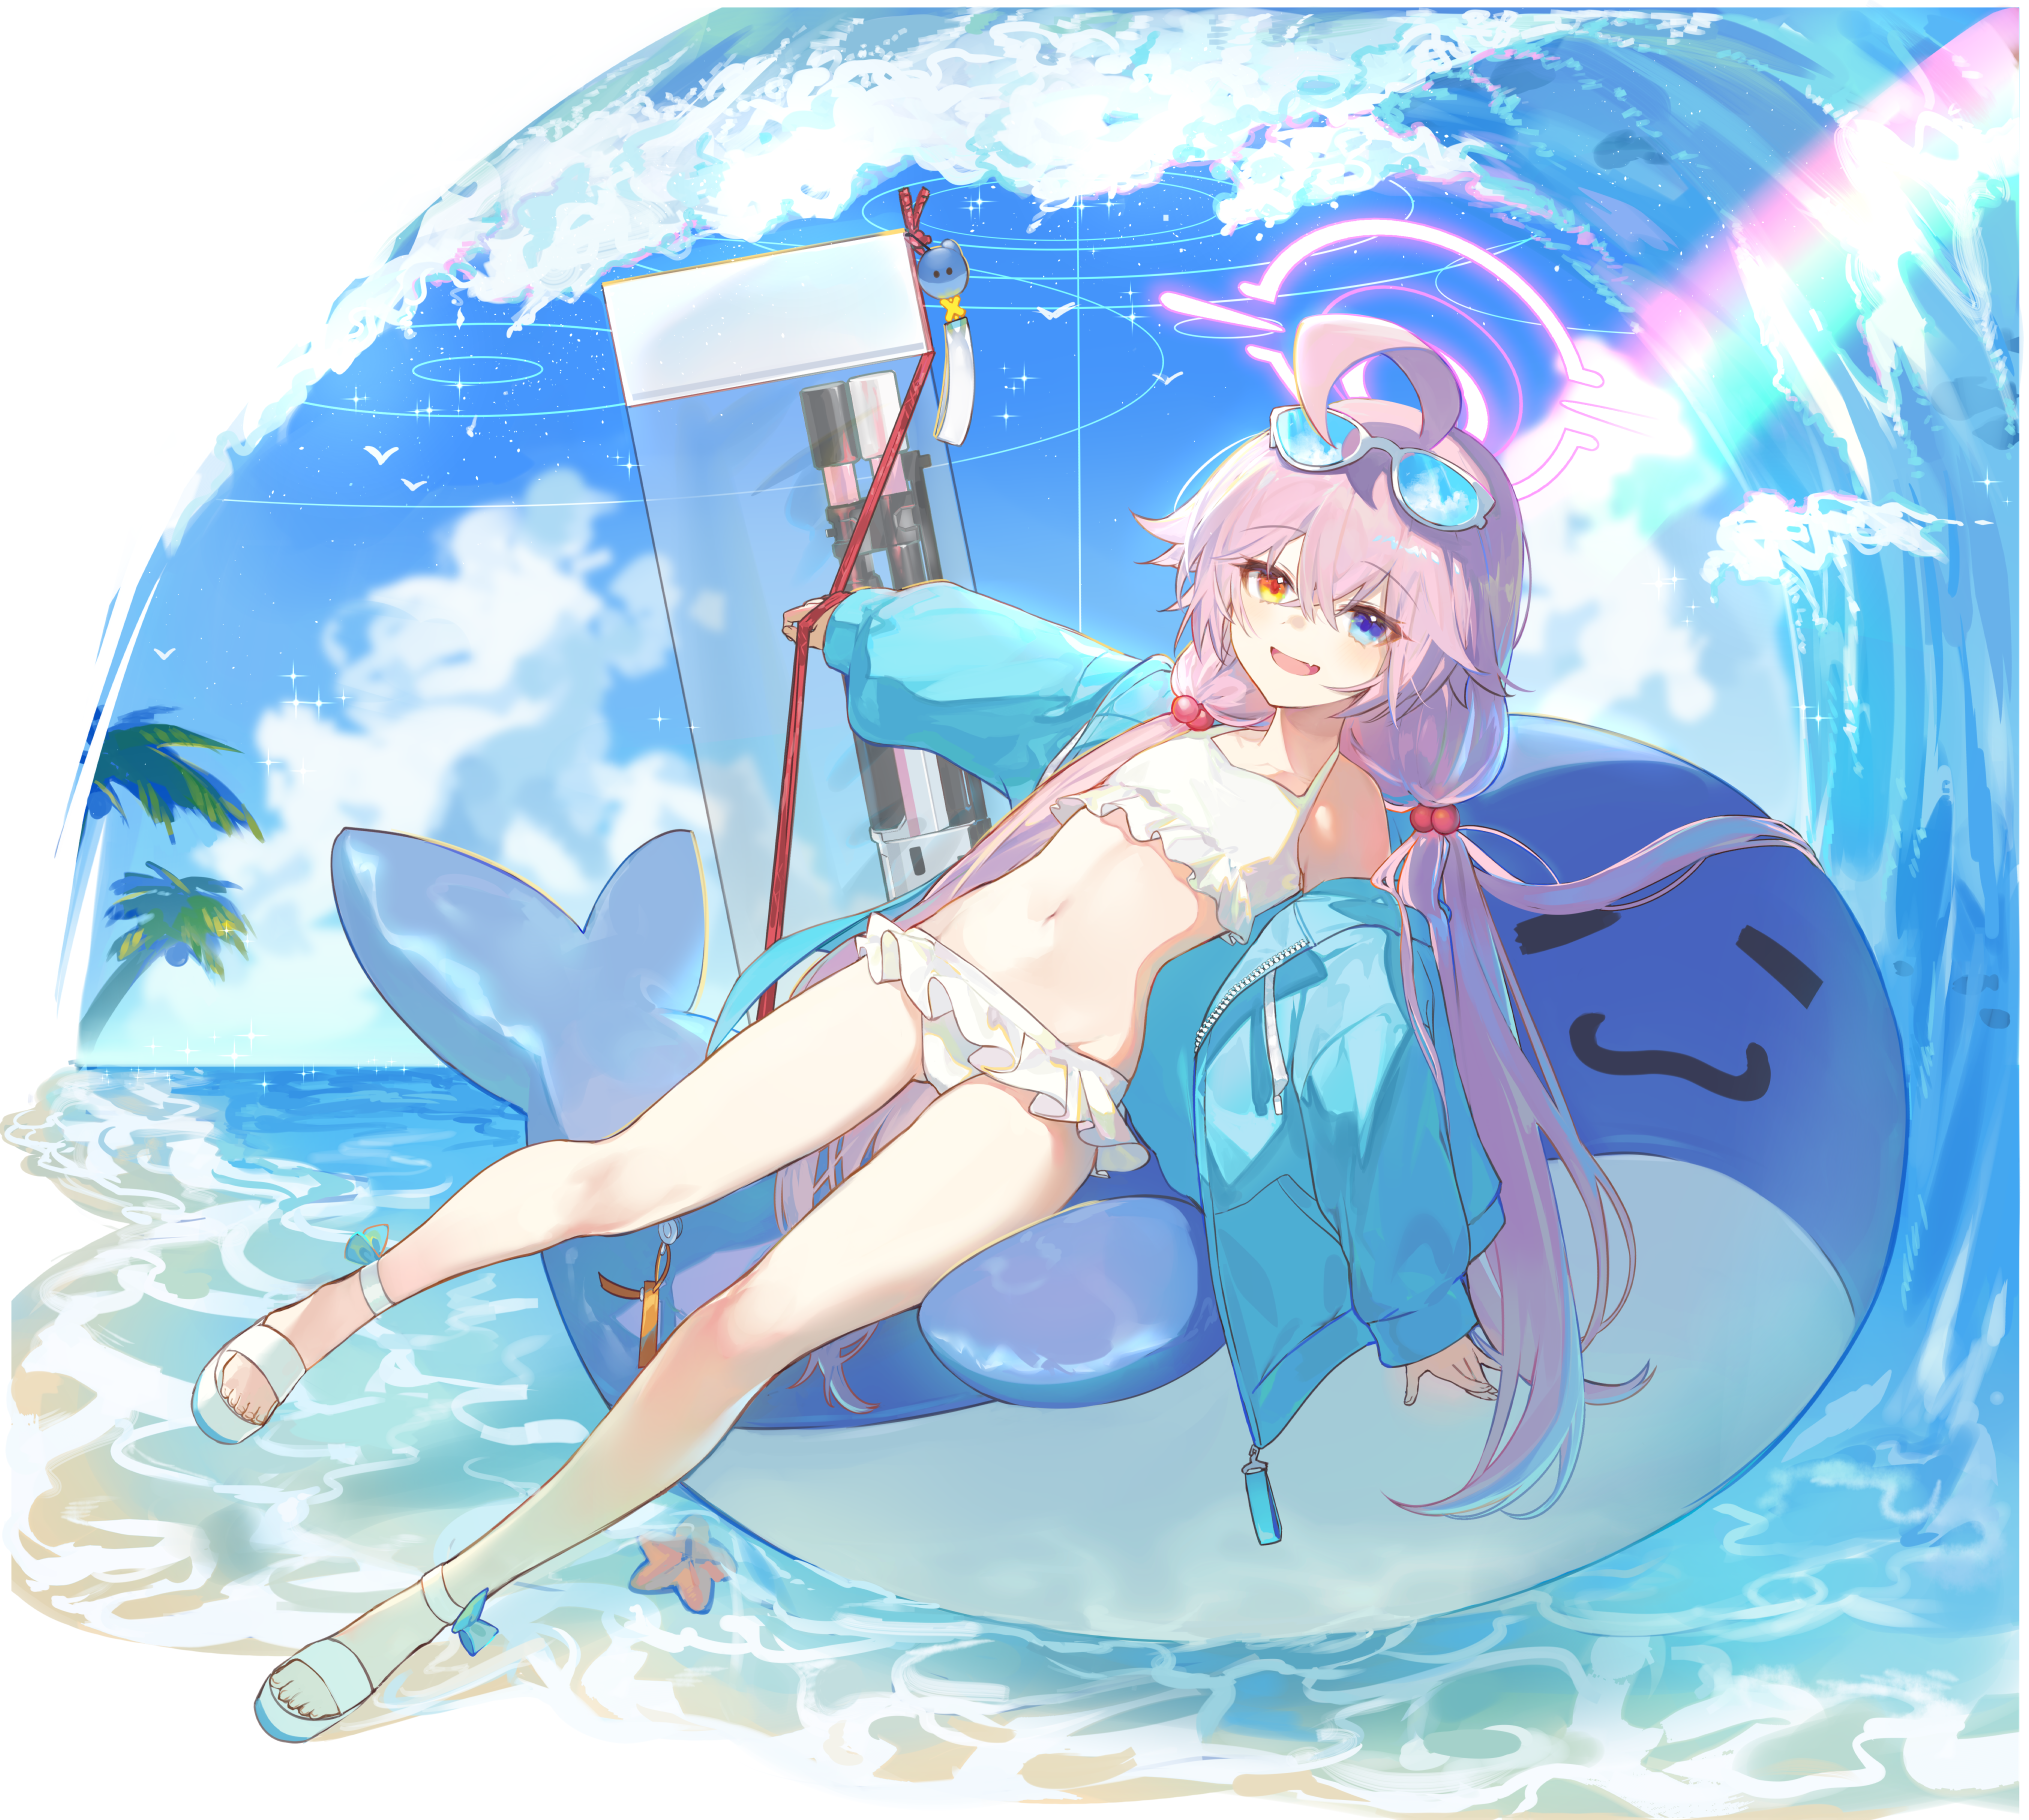 Anime 2029x1820 anime anime girls Takanashi Hoshino (Blue Archive) swimwear Blue Archive hair between eyes long hair heterochromia smiling pink hair open mouth white bikini open coat rainbows clouds sky floater water starfish one bare shoulder women with shades bright sunglasses palm trees sparkles twintails ahoge sp0i0ppp skinny coats